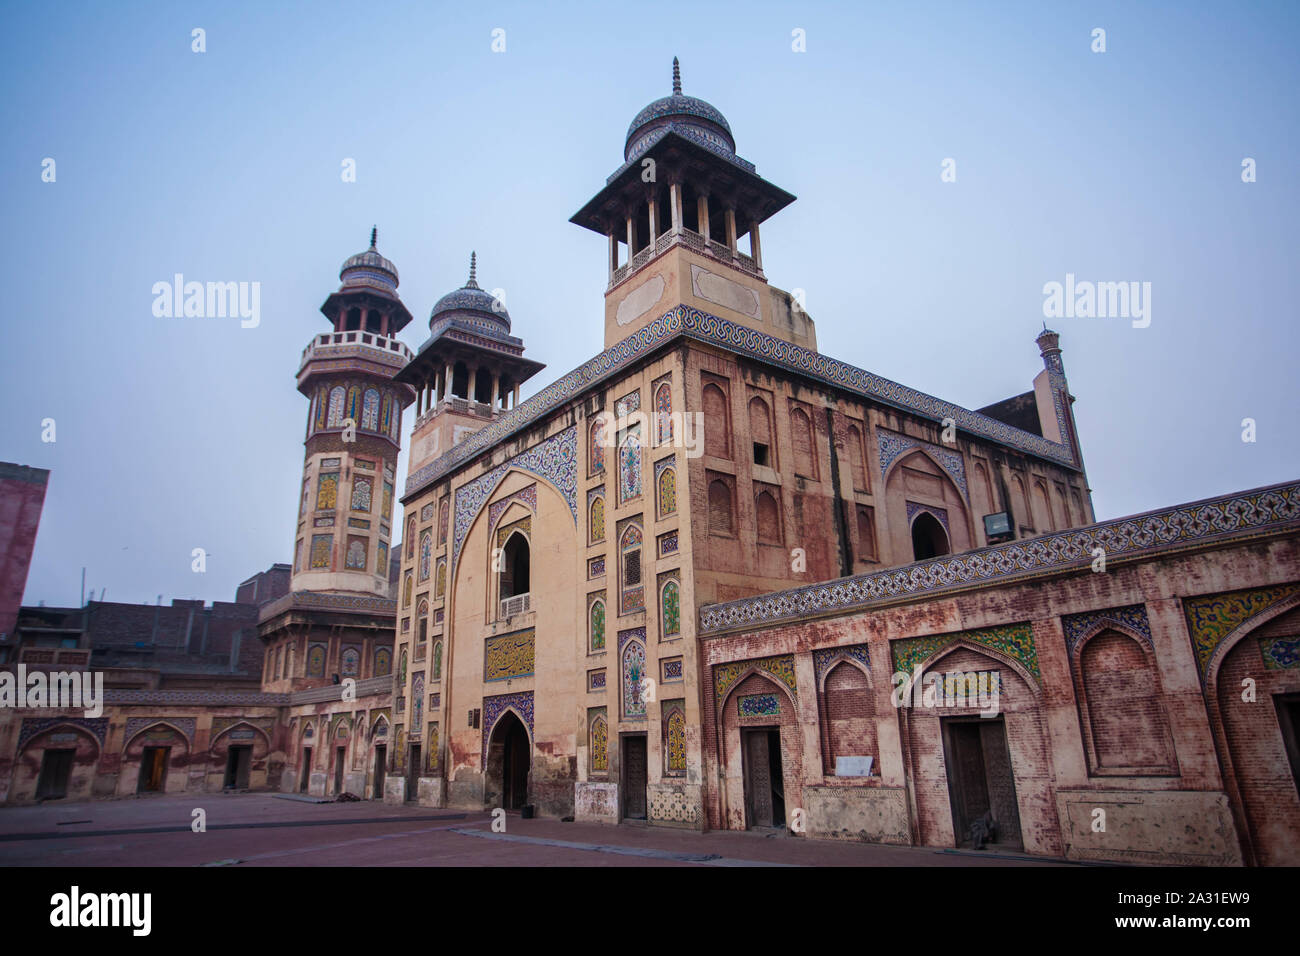 The Wazir Khan Mosque is 17th century mosque located in the city of Lahore, capital of the Pakistani province of Punjab. Stock Photo